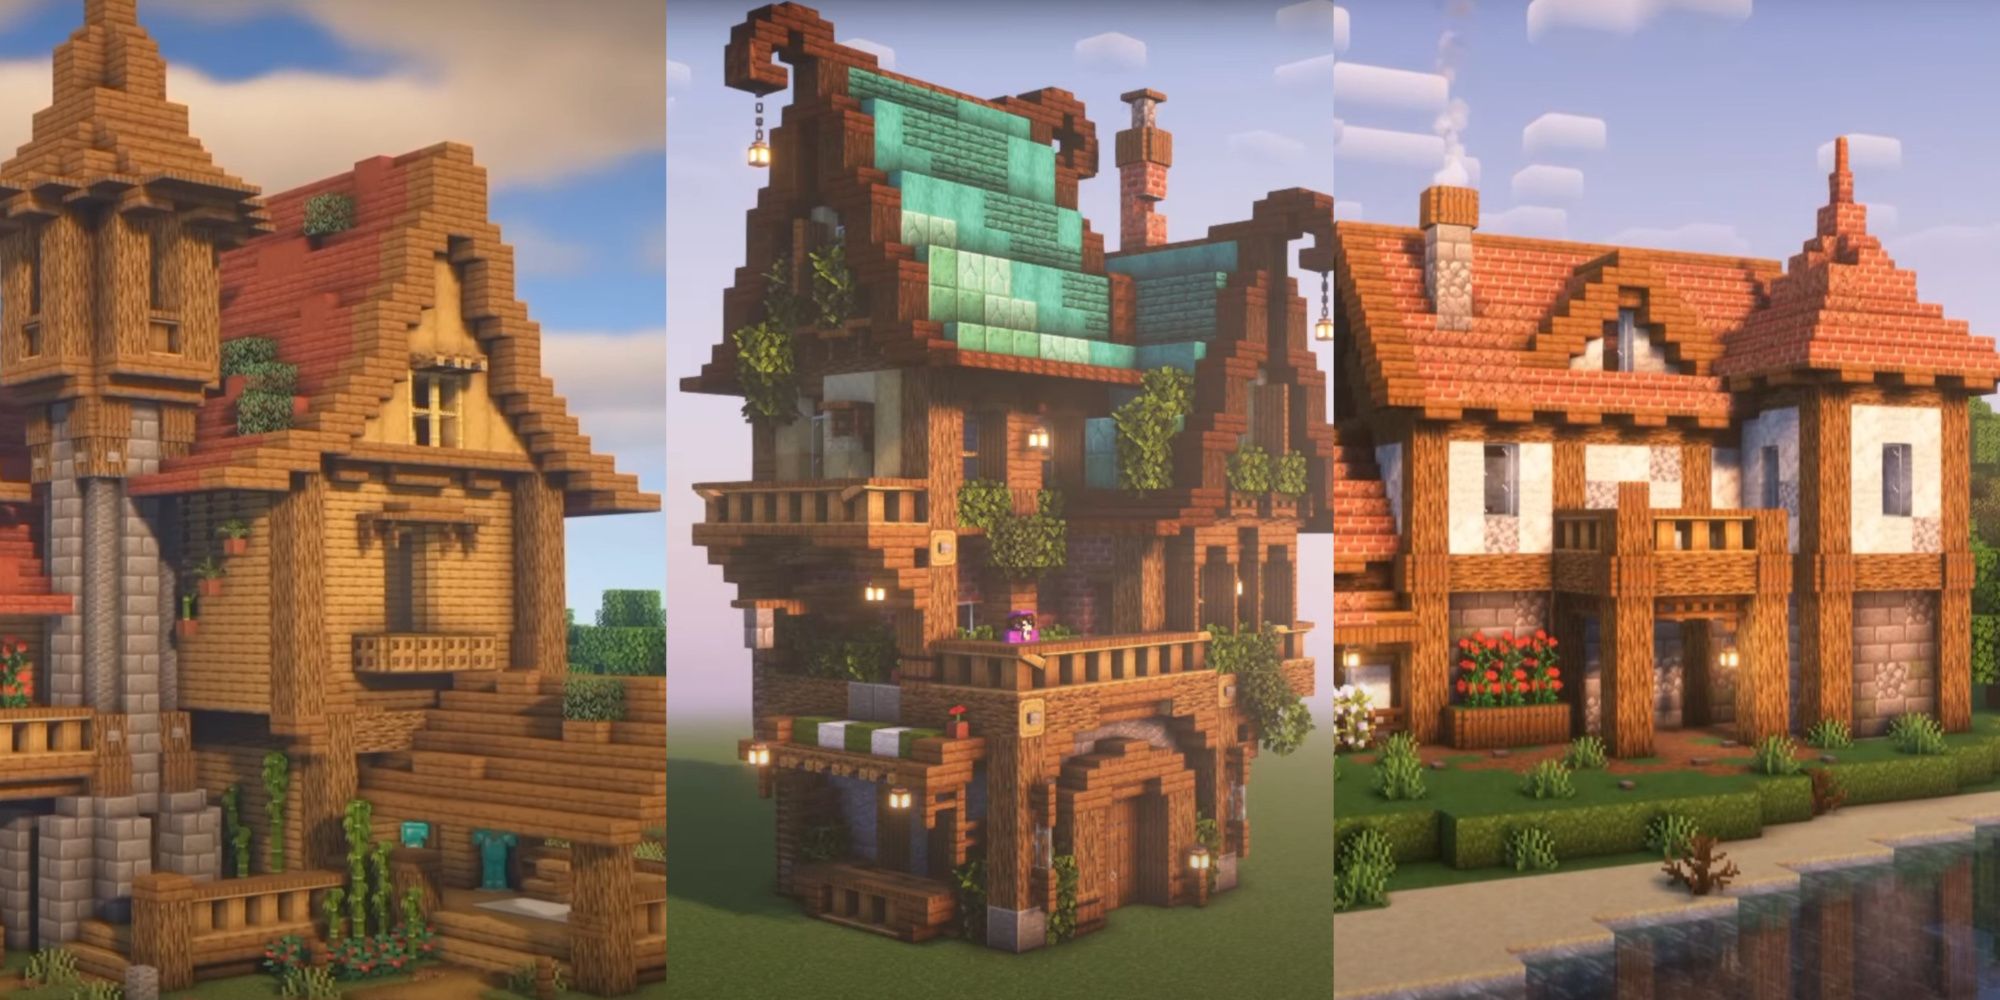 An image from Minecraft, featuring three different houses with unique building styles. This phoot features a traditional wooden house, a fantasy inspired mansion, and a classic house with a brick roof.